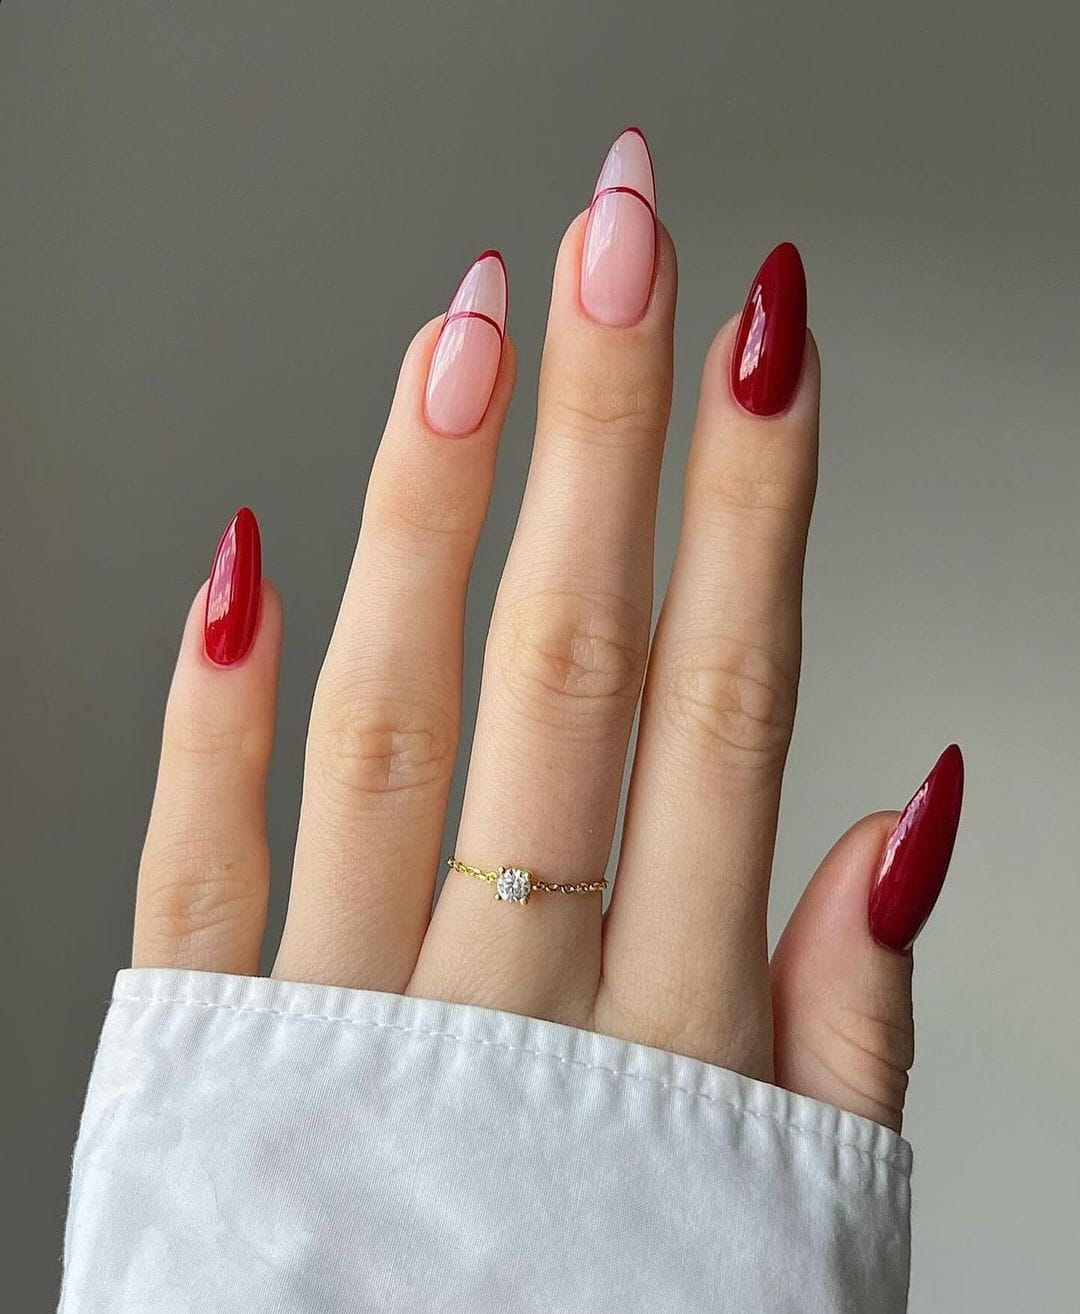 100+ Best Winter Nail Ideas And Designs To Try images 17